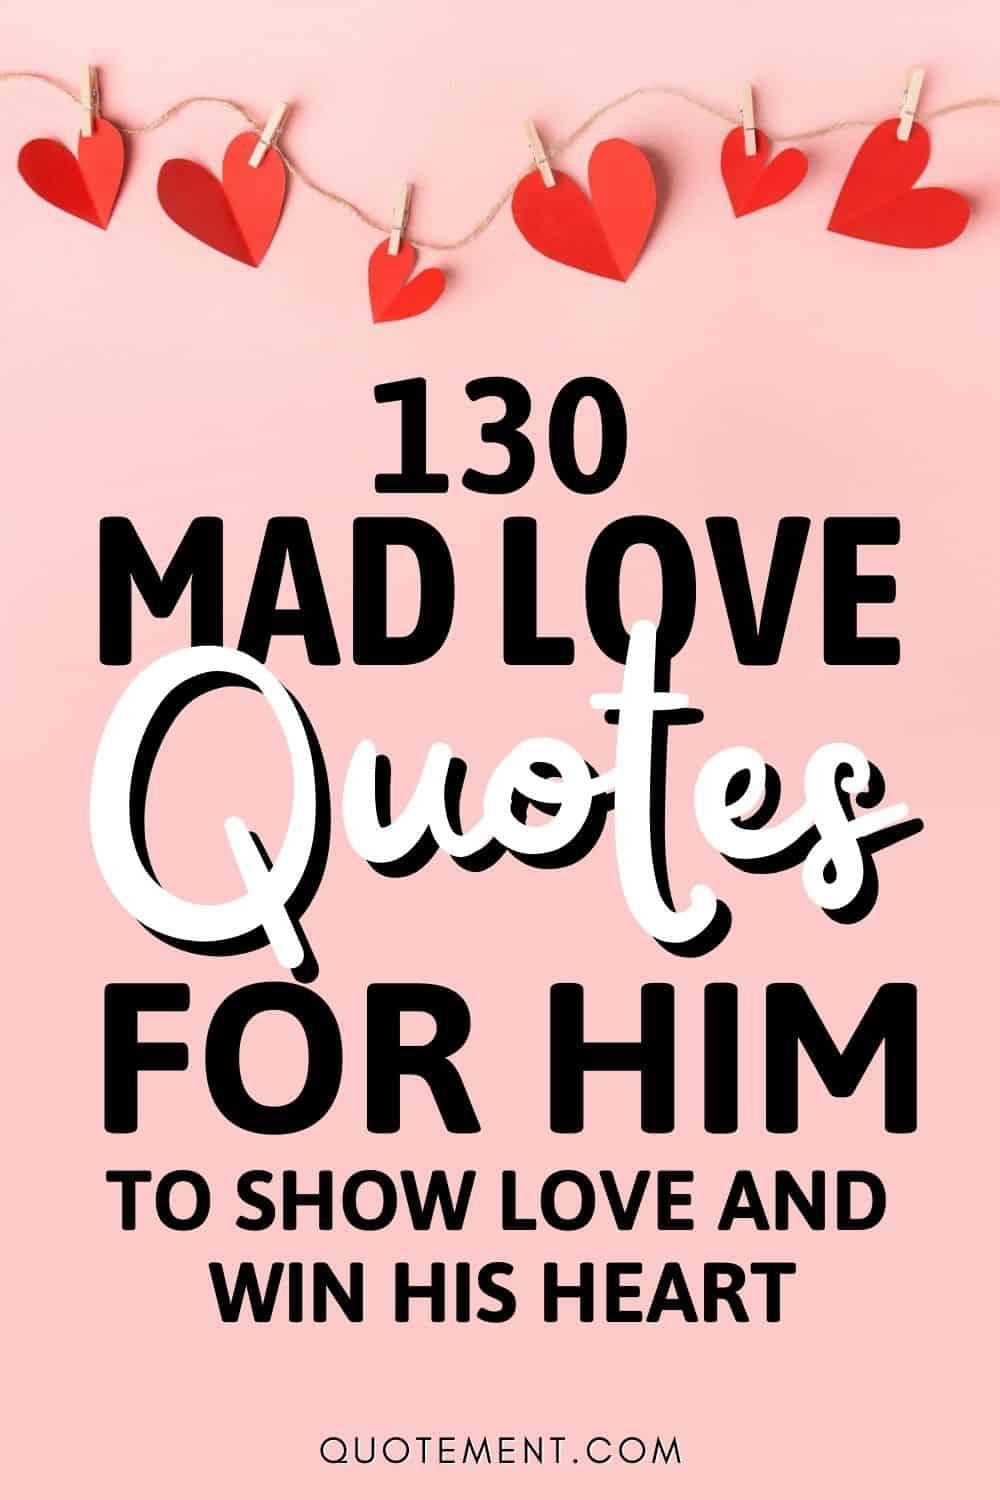 130 Mad Love Quotes For Him To Show Love & Win His Heart